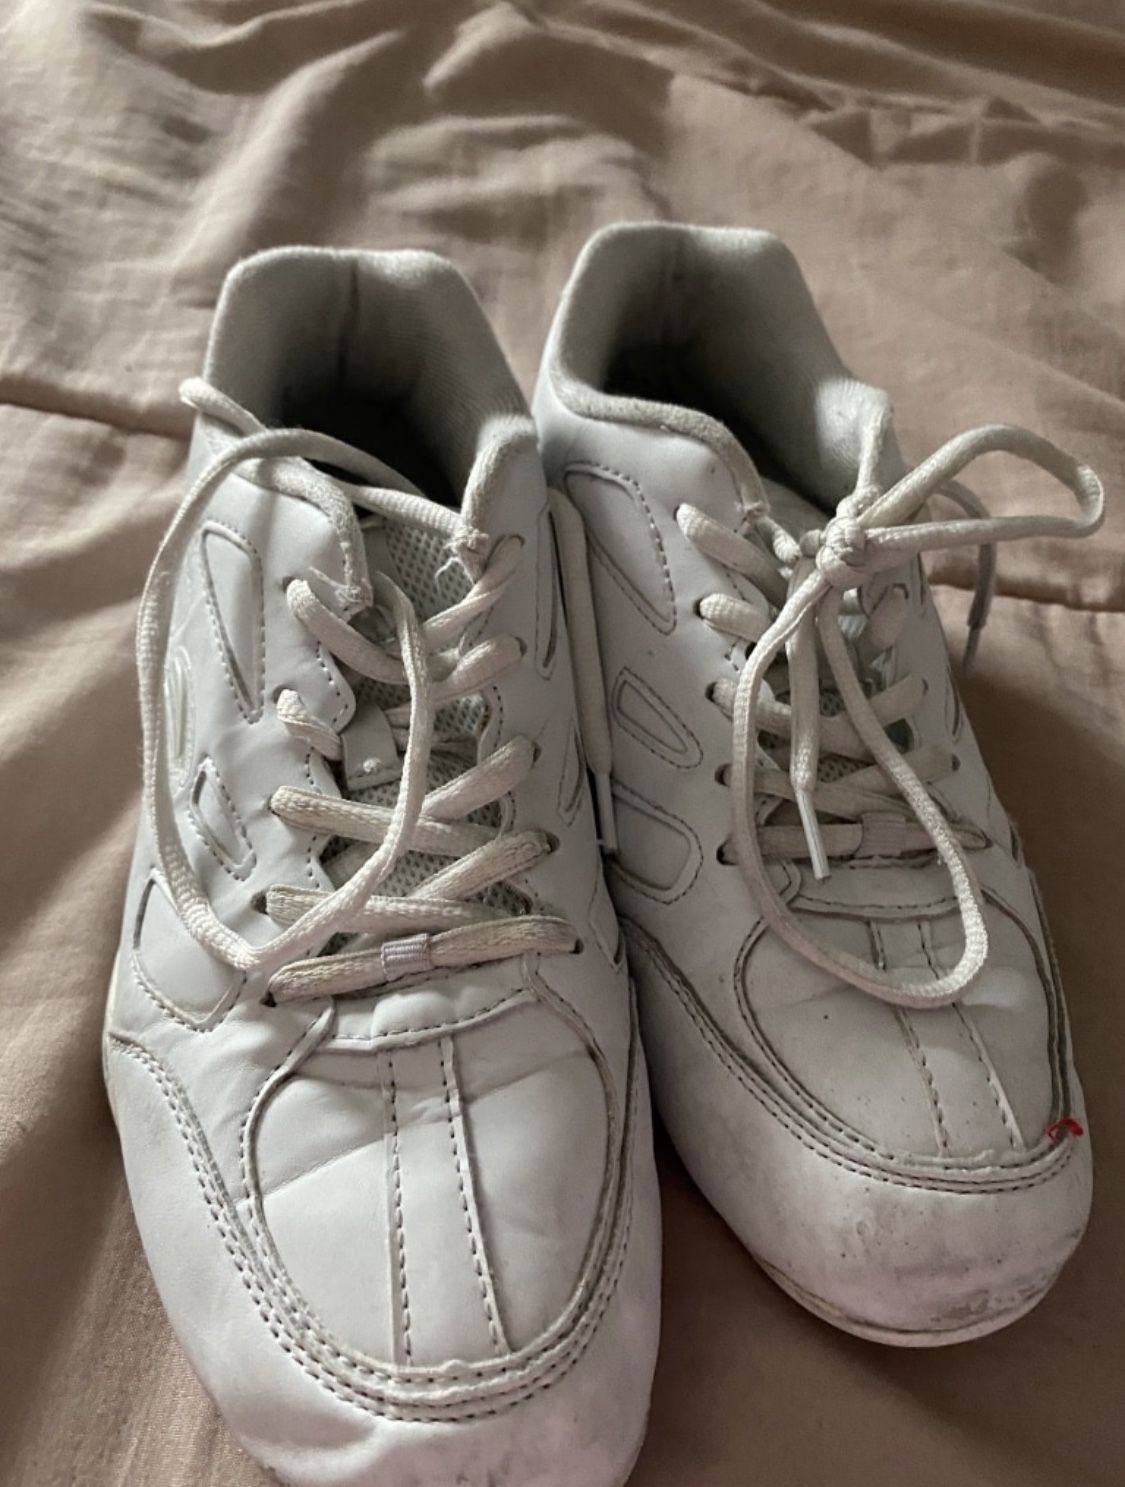 Cheer shoes